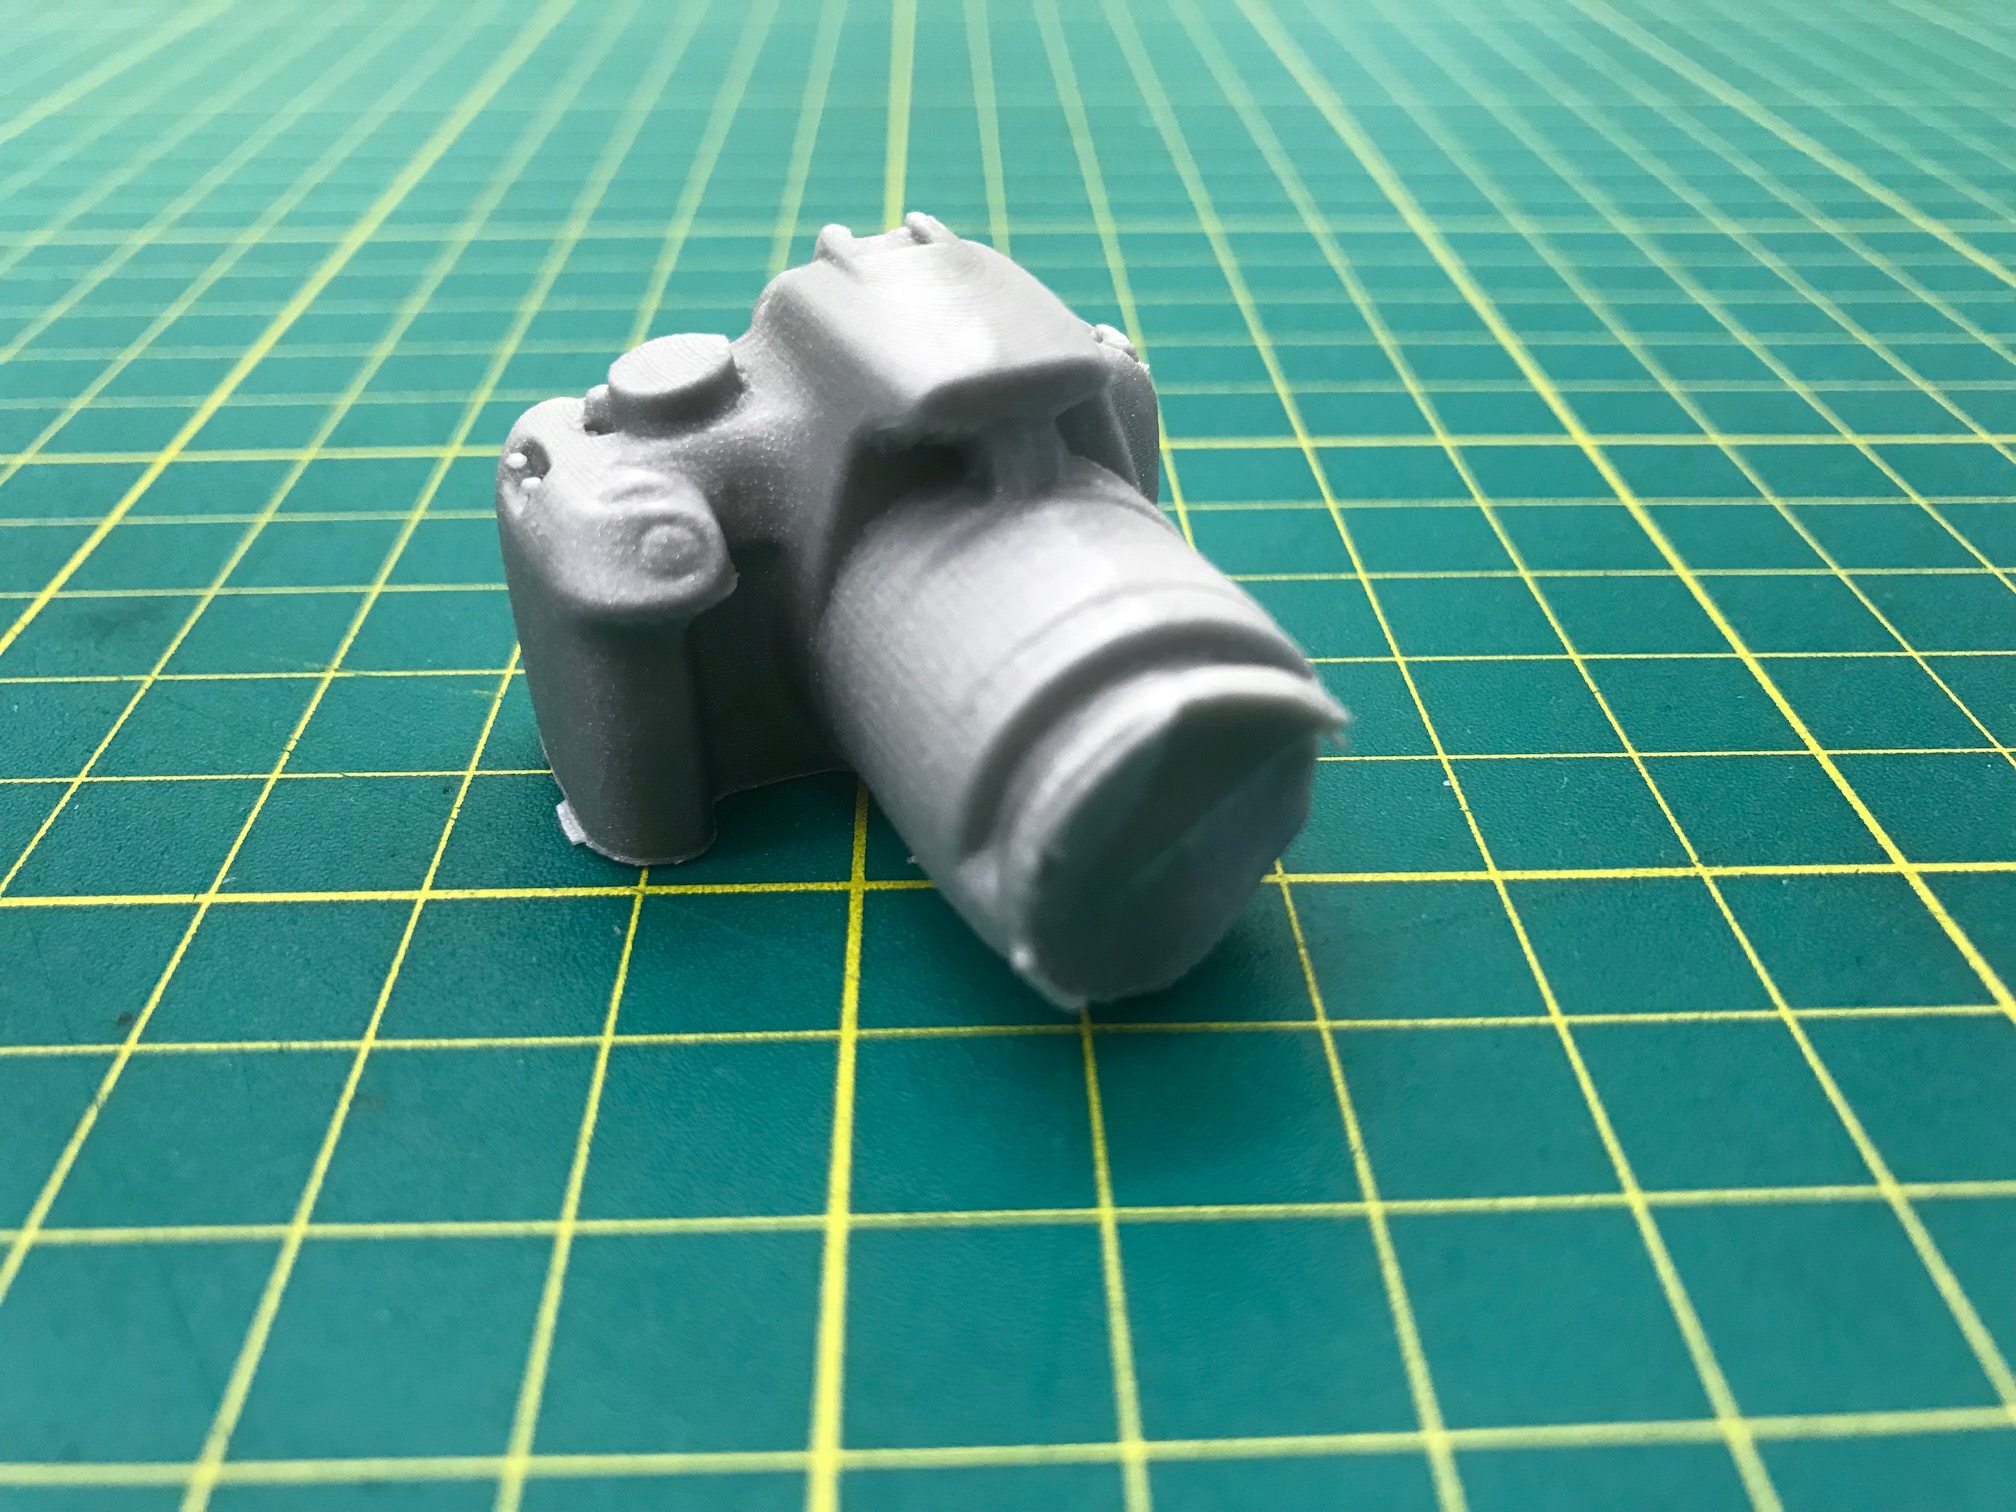 Camera printed out